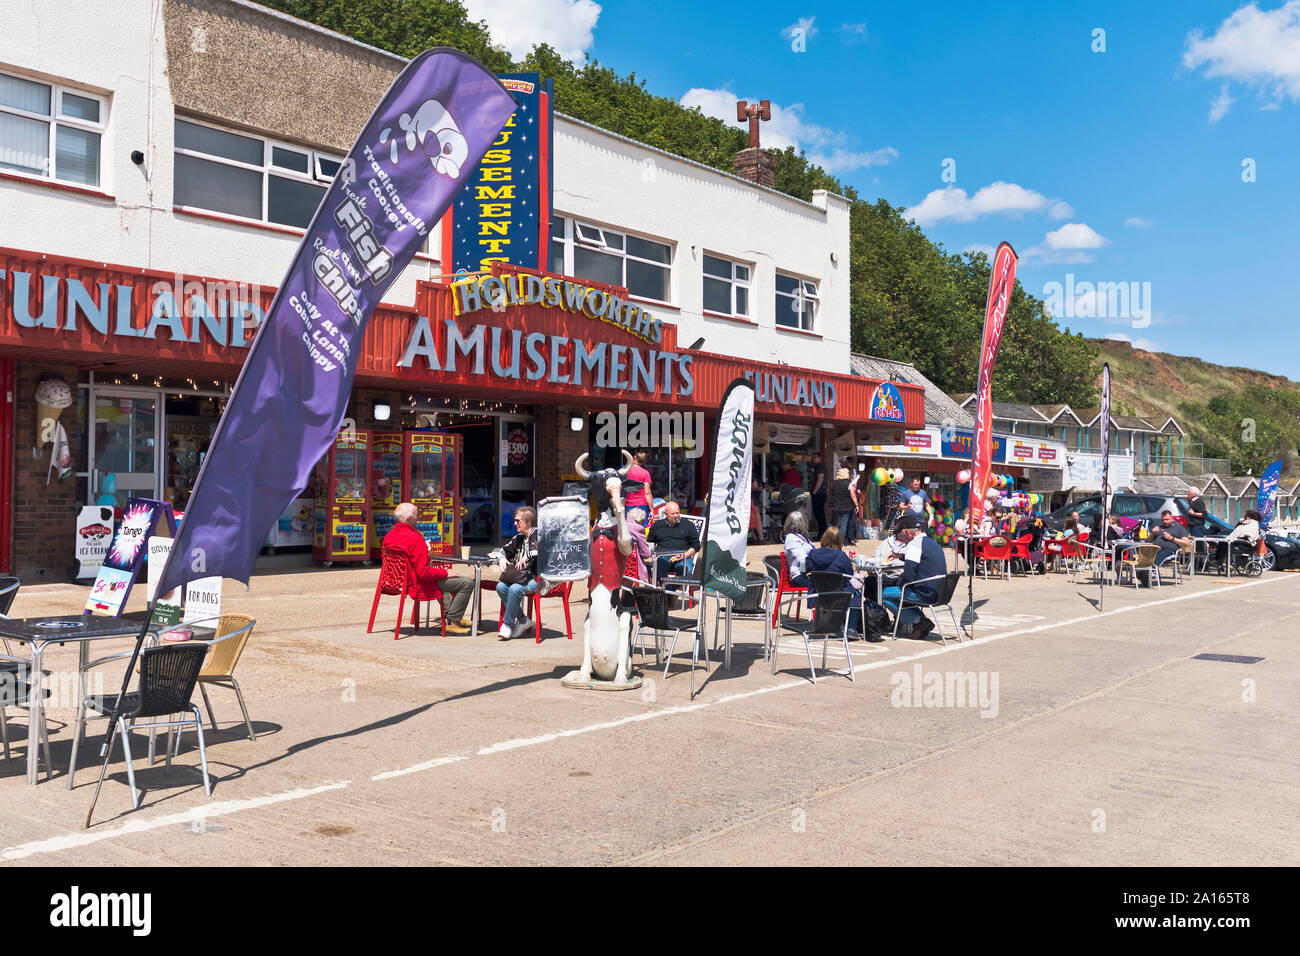 Dh Coble sbarco FILEY North Yorkshire persone relax outdoor cafe tabelle Foto Stock